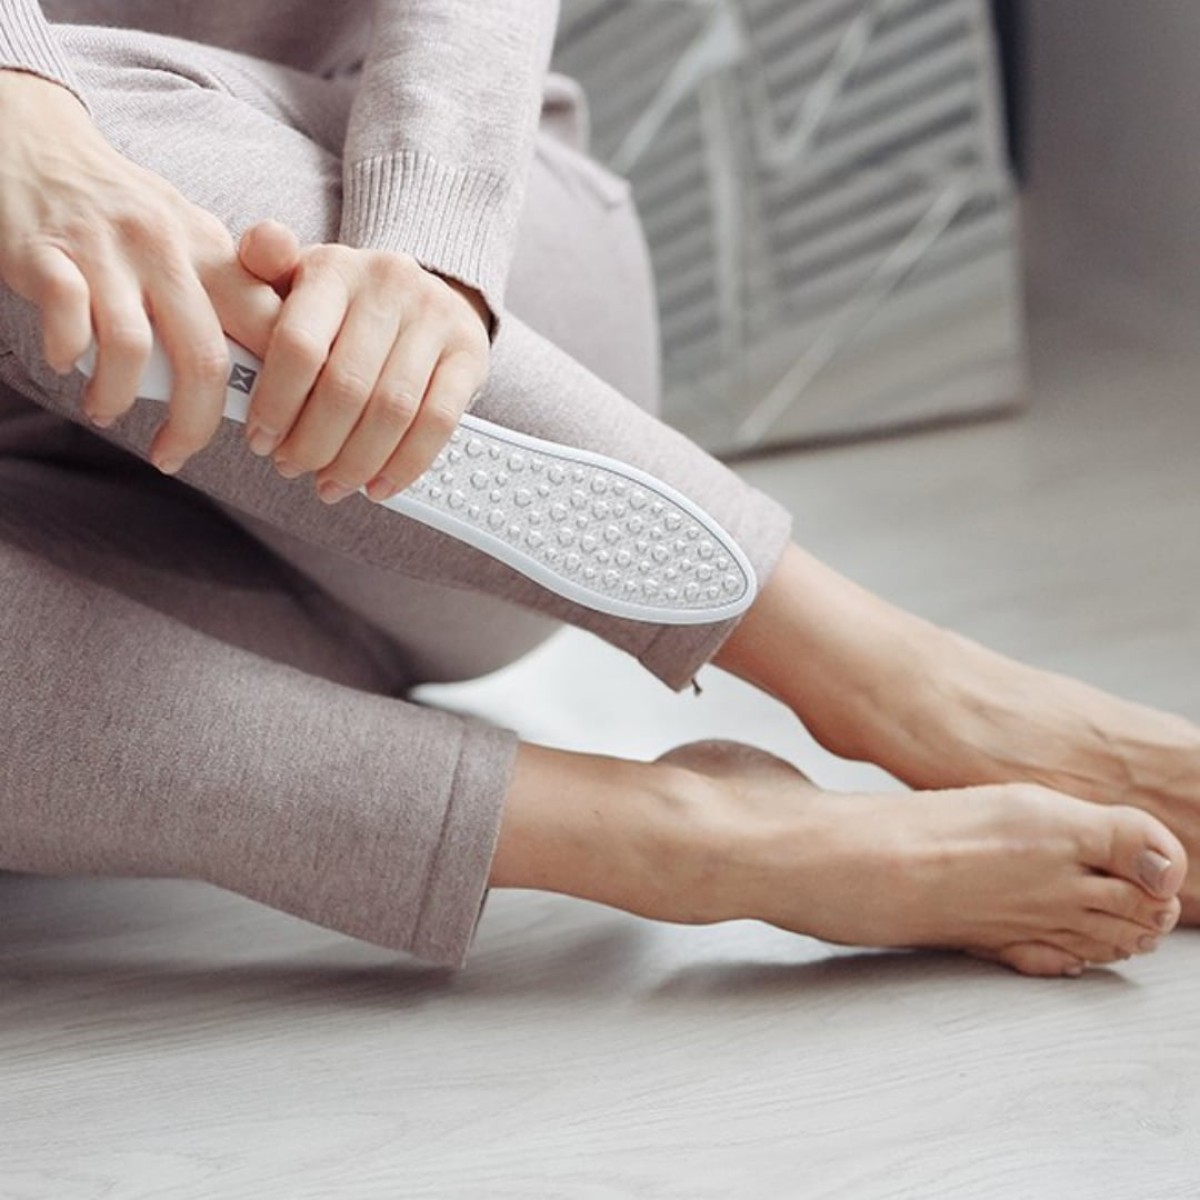 TENS Unit For Plantar Fasciitis – How Effective Is It?